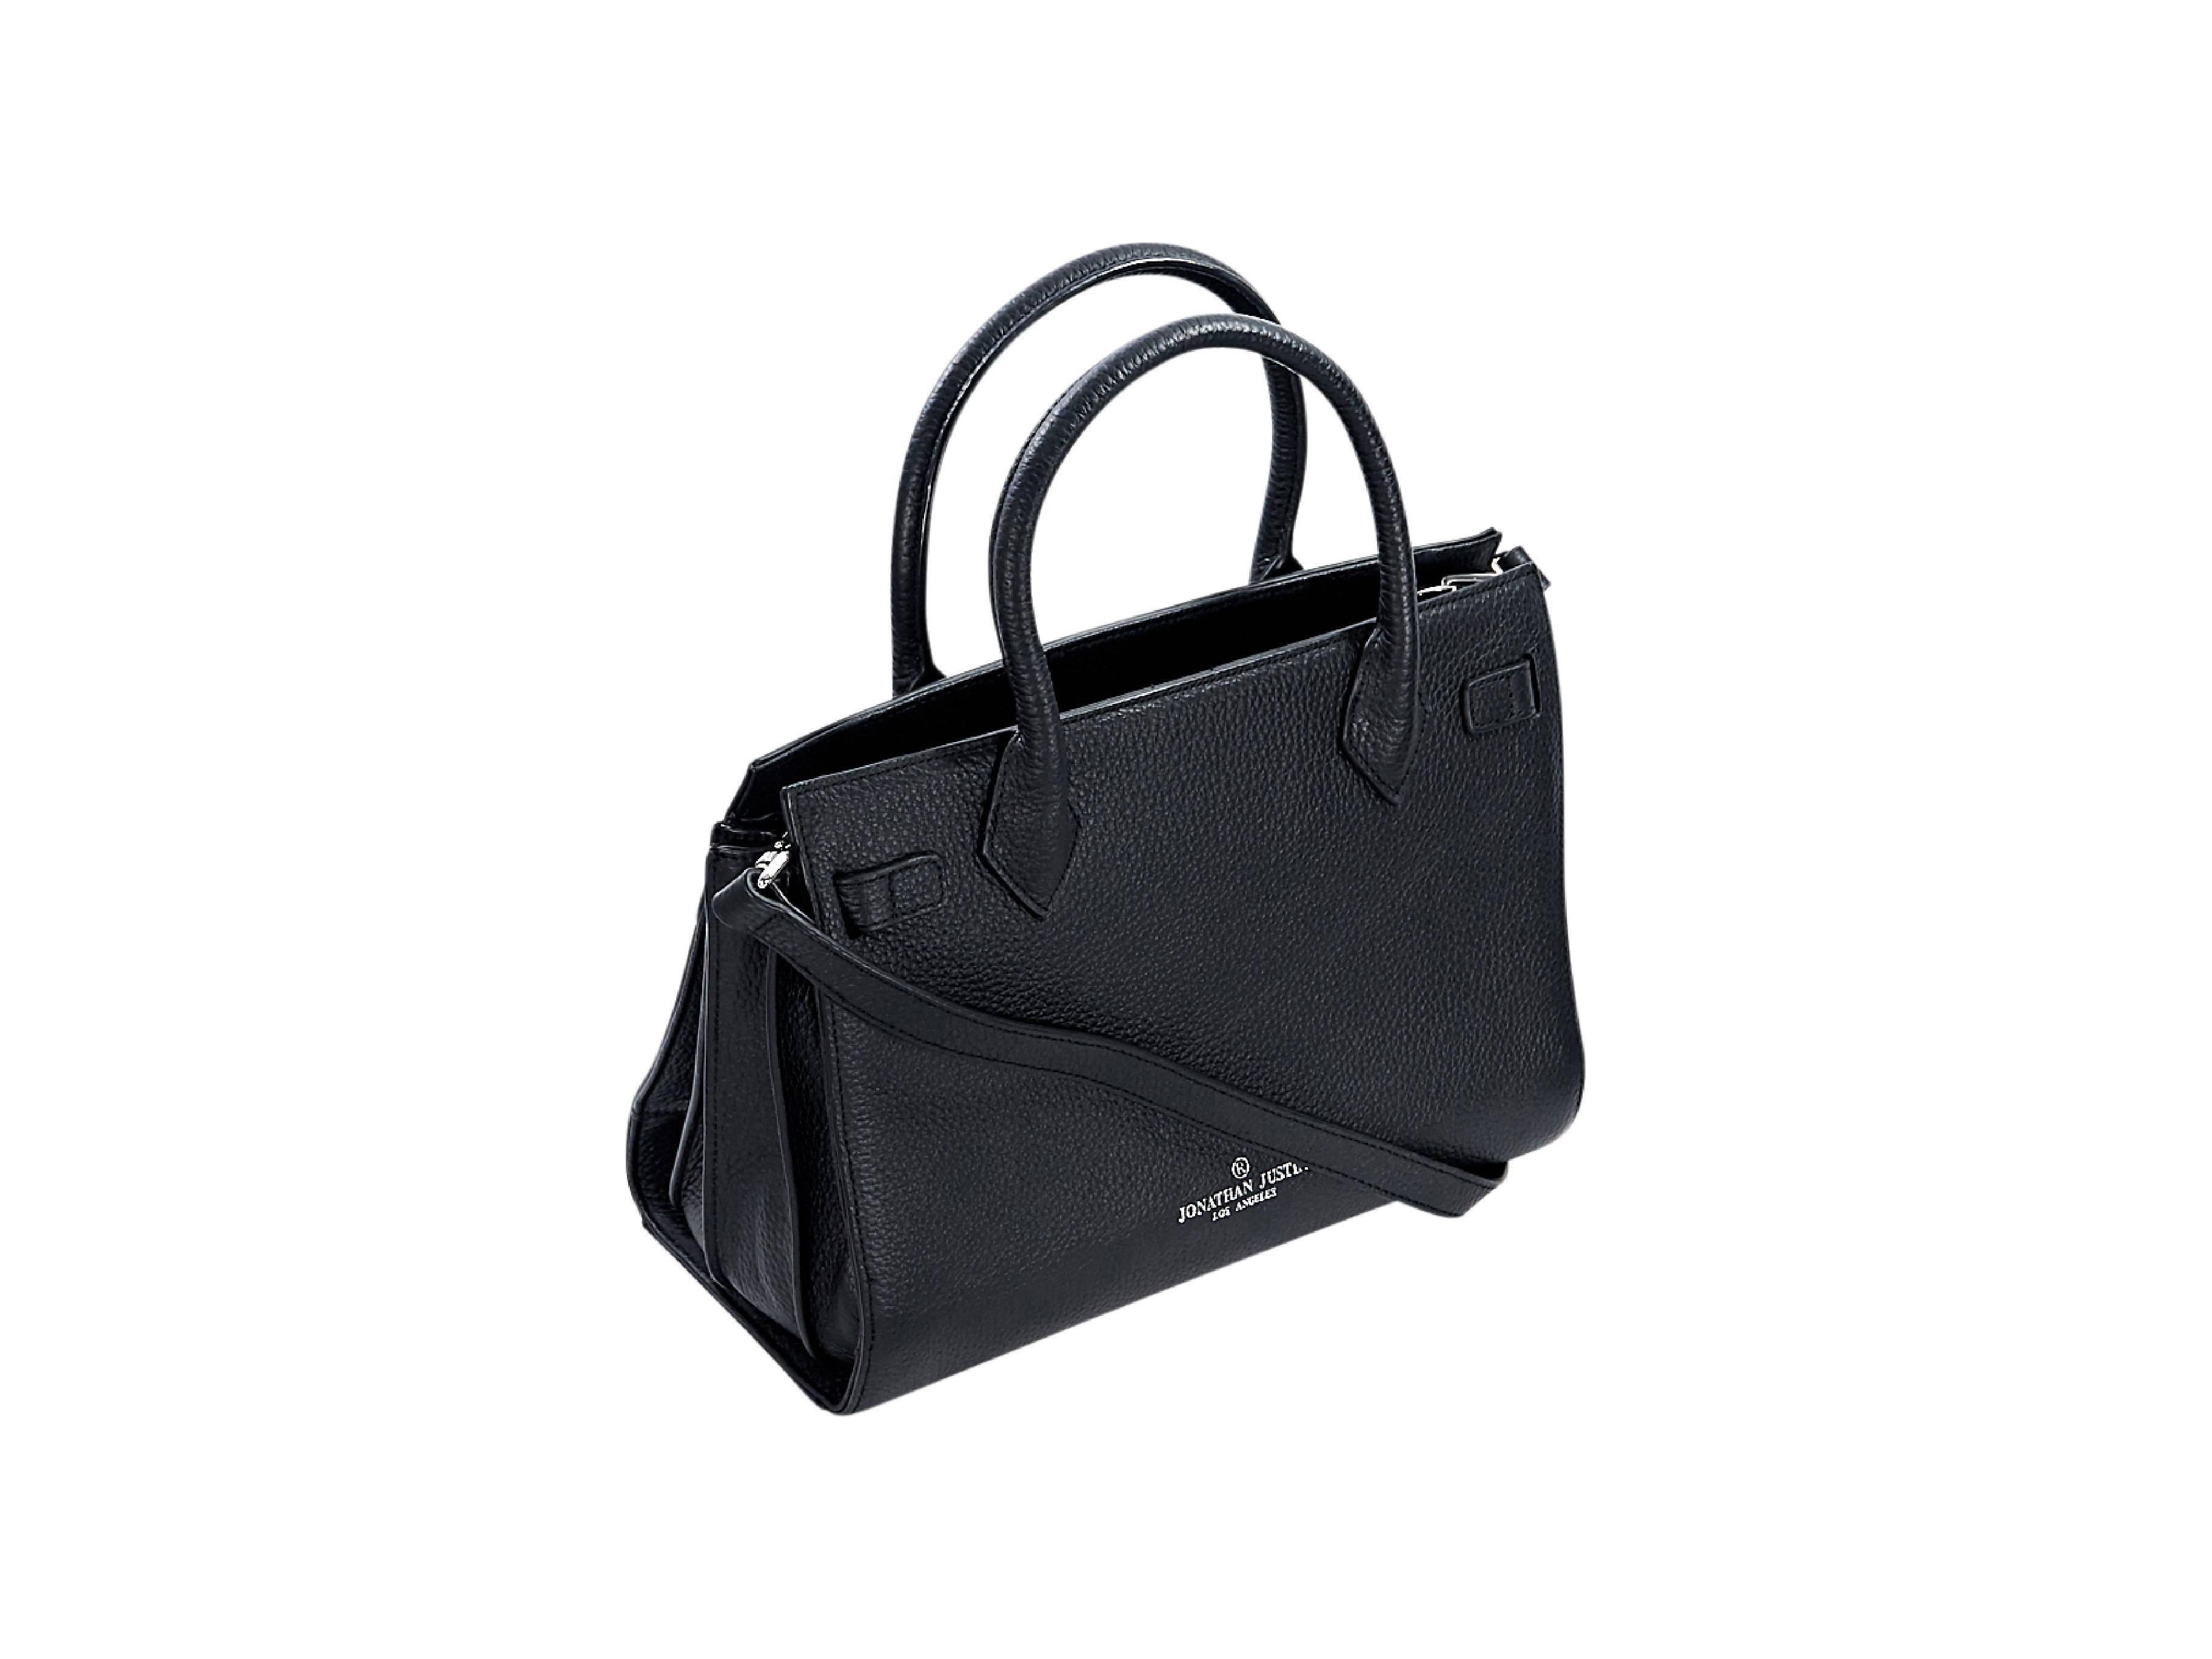 Product details:  Black pebbled leather Elinna Togo satchel by Jonathan Justin.  Dual top carry handles.  Detachable, adjustable crossbody strap.  Open top.  Lined interior with inner zip and slide pockets.  Protective metal feet.  Silvertone